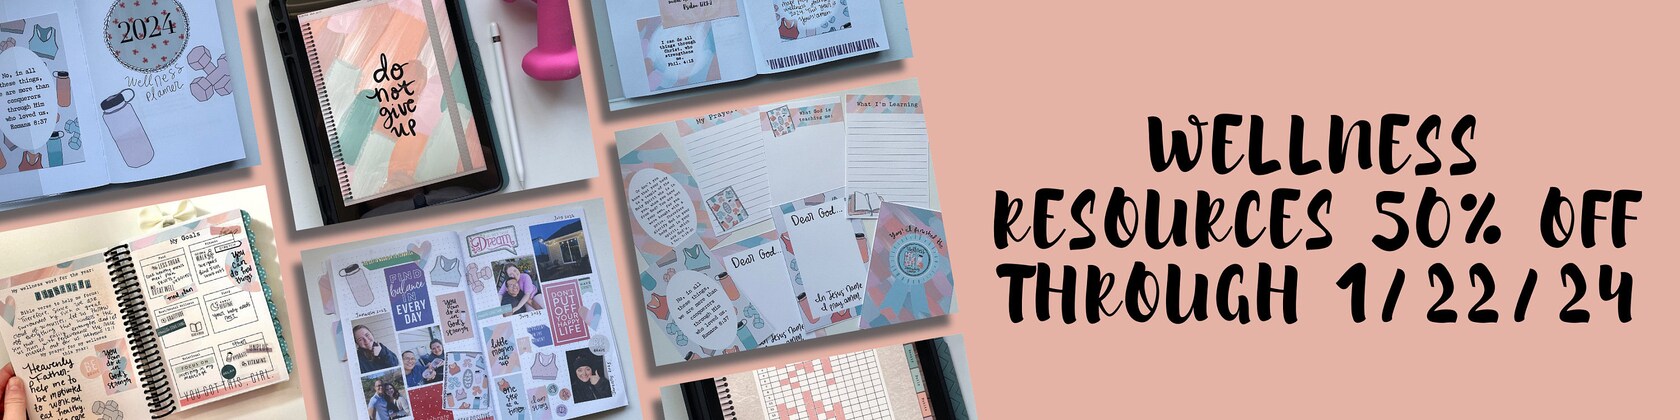 Bullet Journaling/Planner Freebie: Favorites Page - Creative Faith and Co